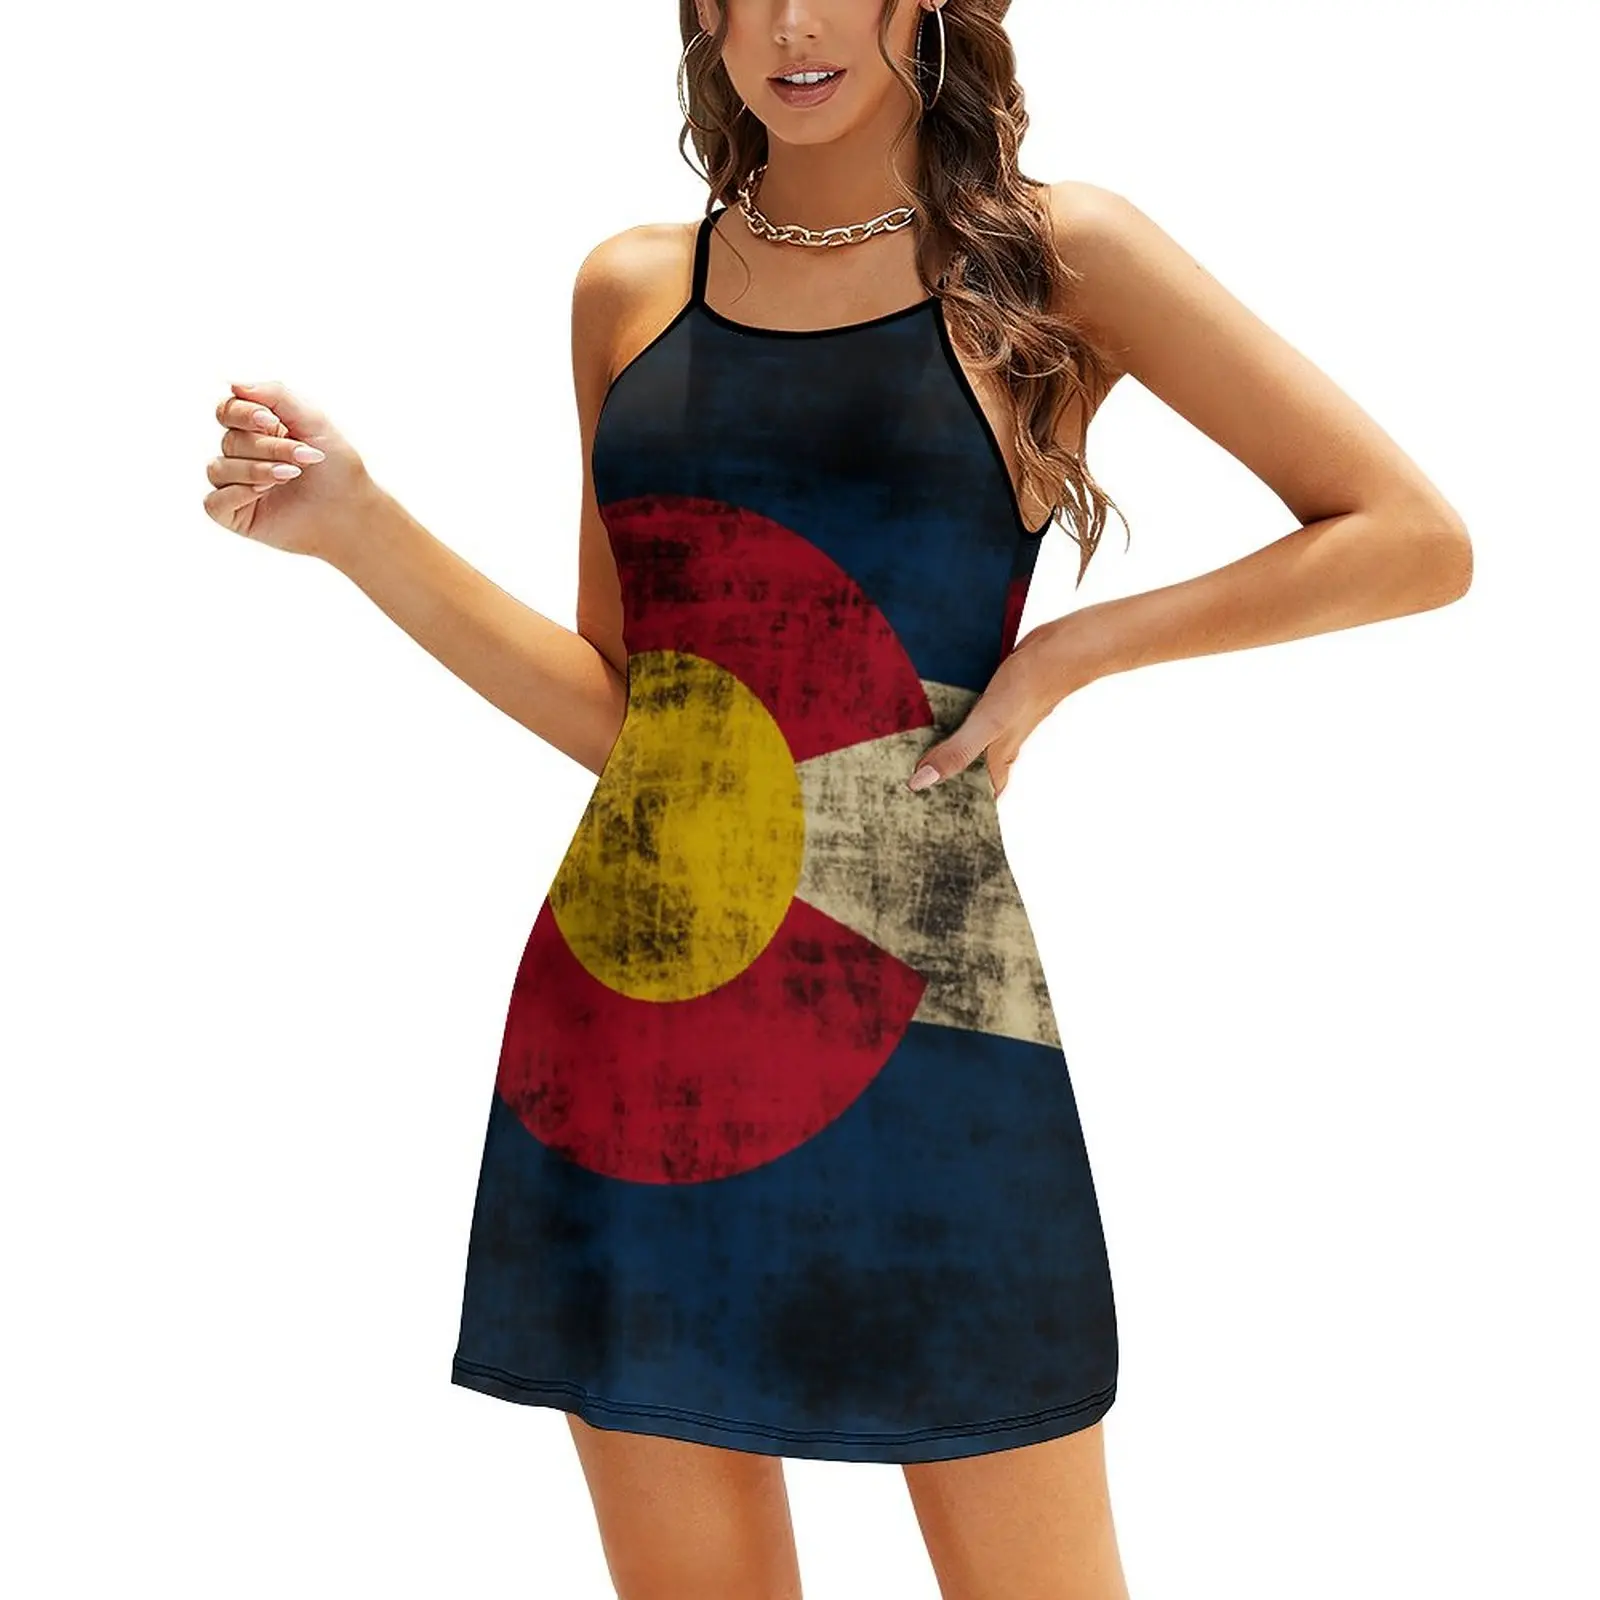 

Exotic Vintage Grunge State of Colorado Flag Women's Sling Dress Nerdy Vacations Woman's Gown Suspender Dress Graphic Cool